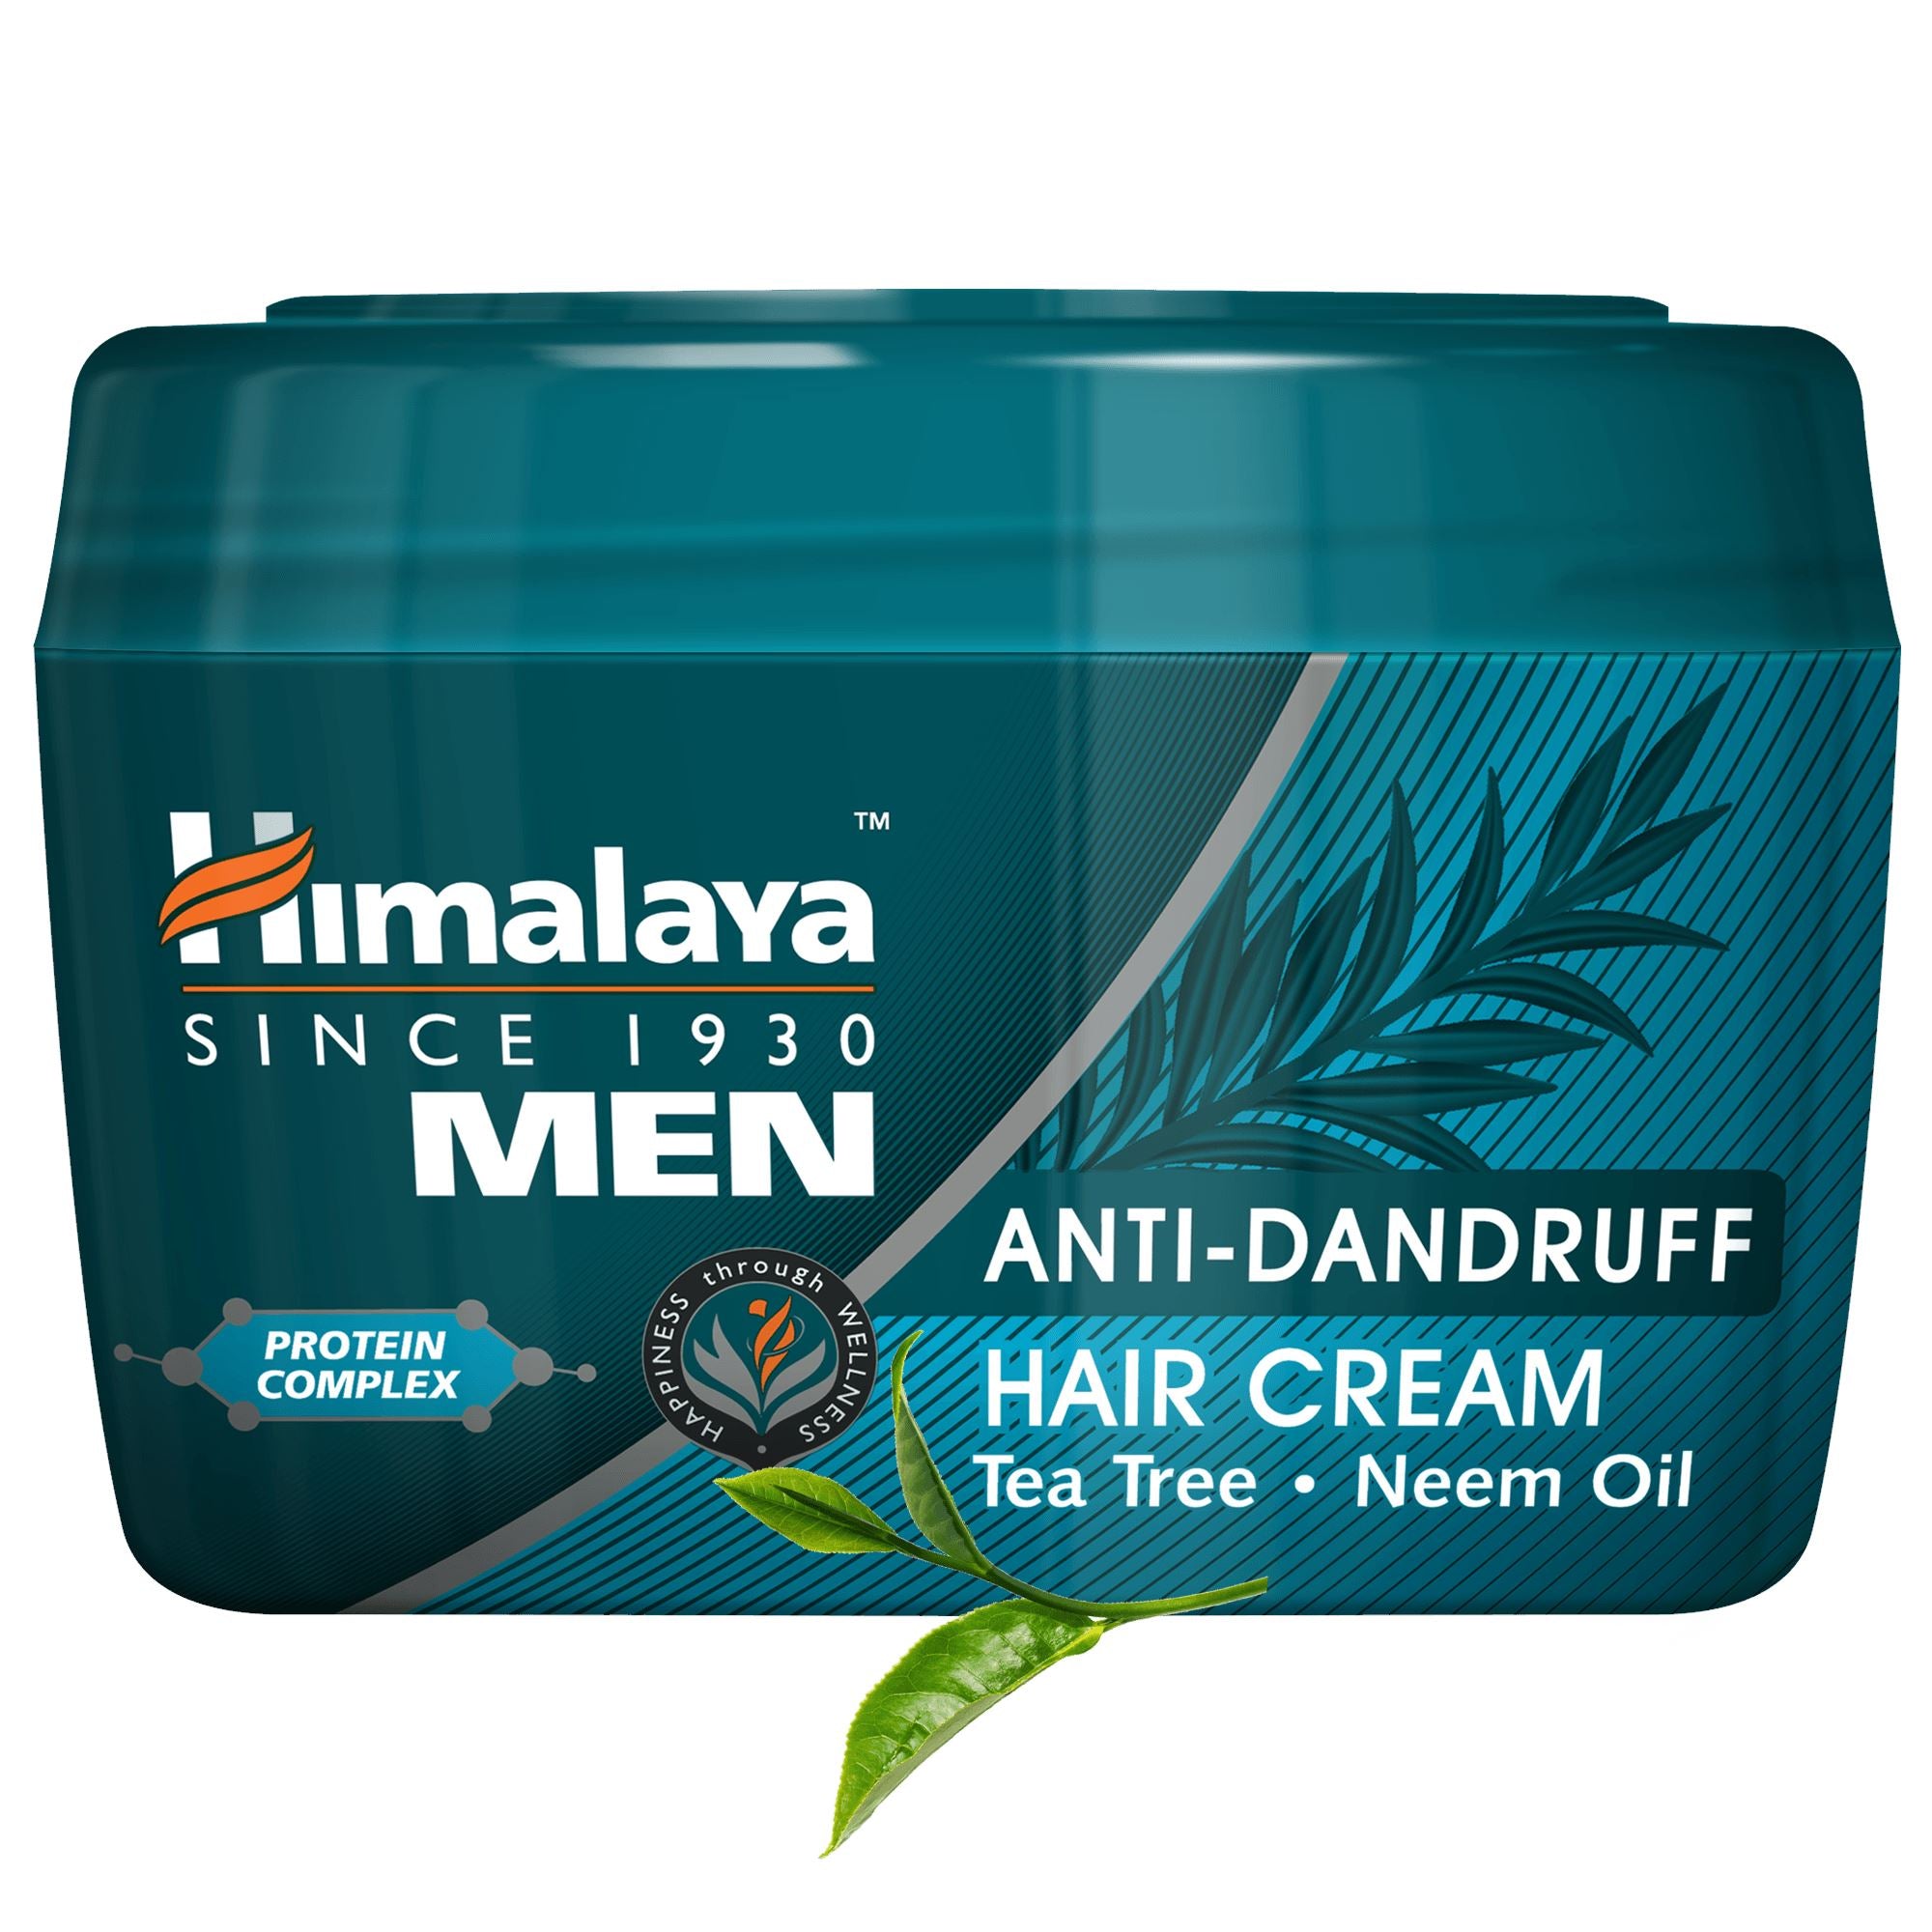 Himalaya MEN Anti-Dandruff Hair Cream - Helps fight dandruff and soothes the scalp